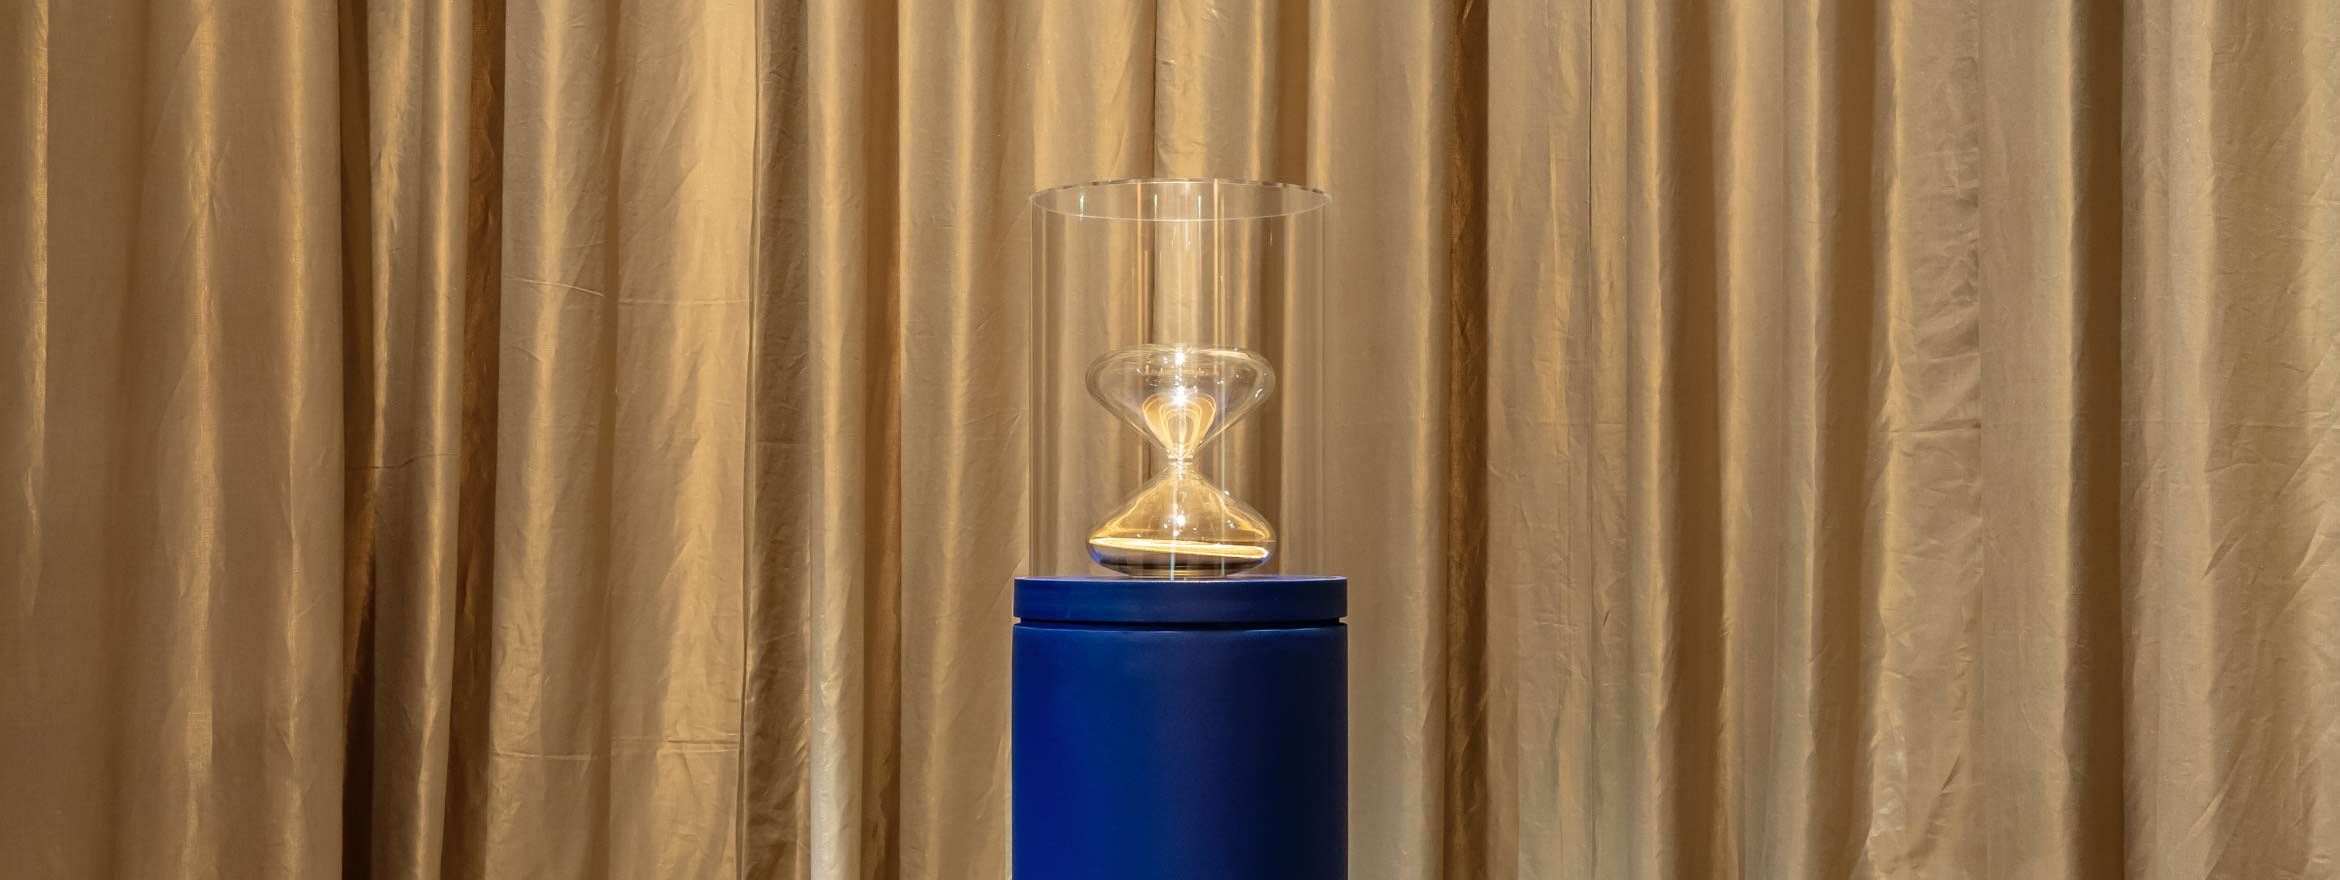 The Remarkable Journey of The Hourglass by Marc Newson